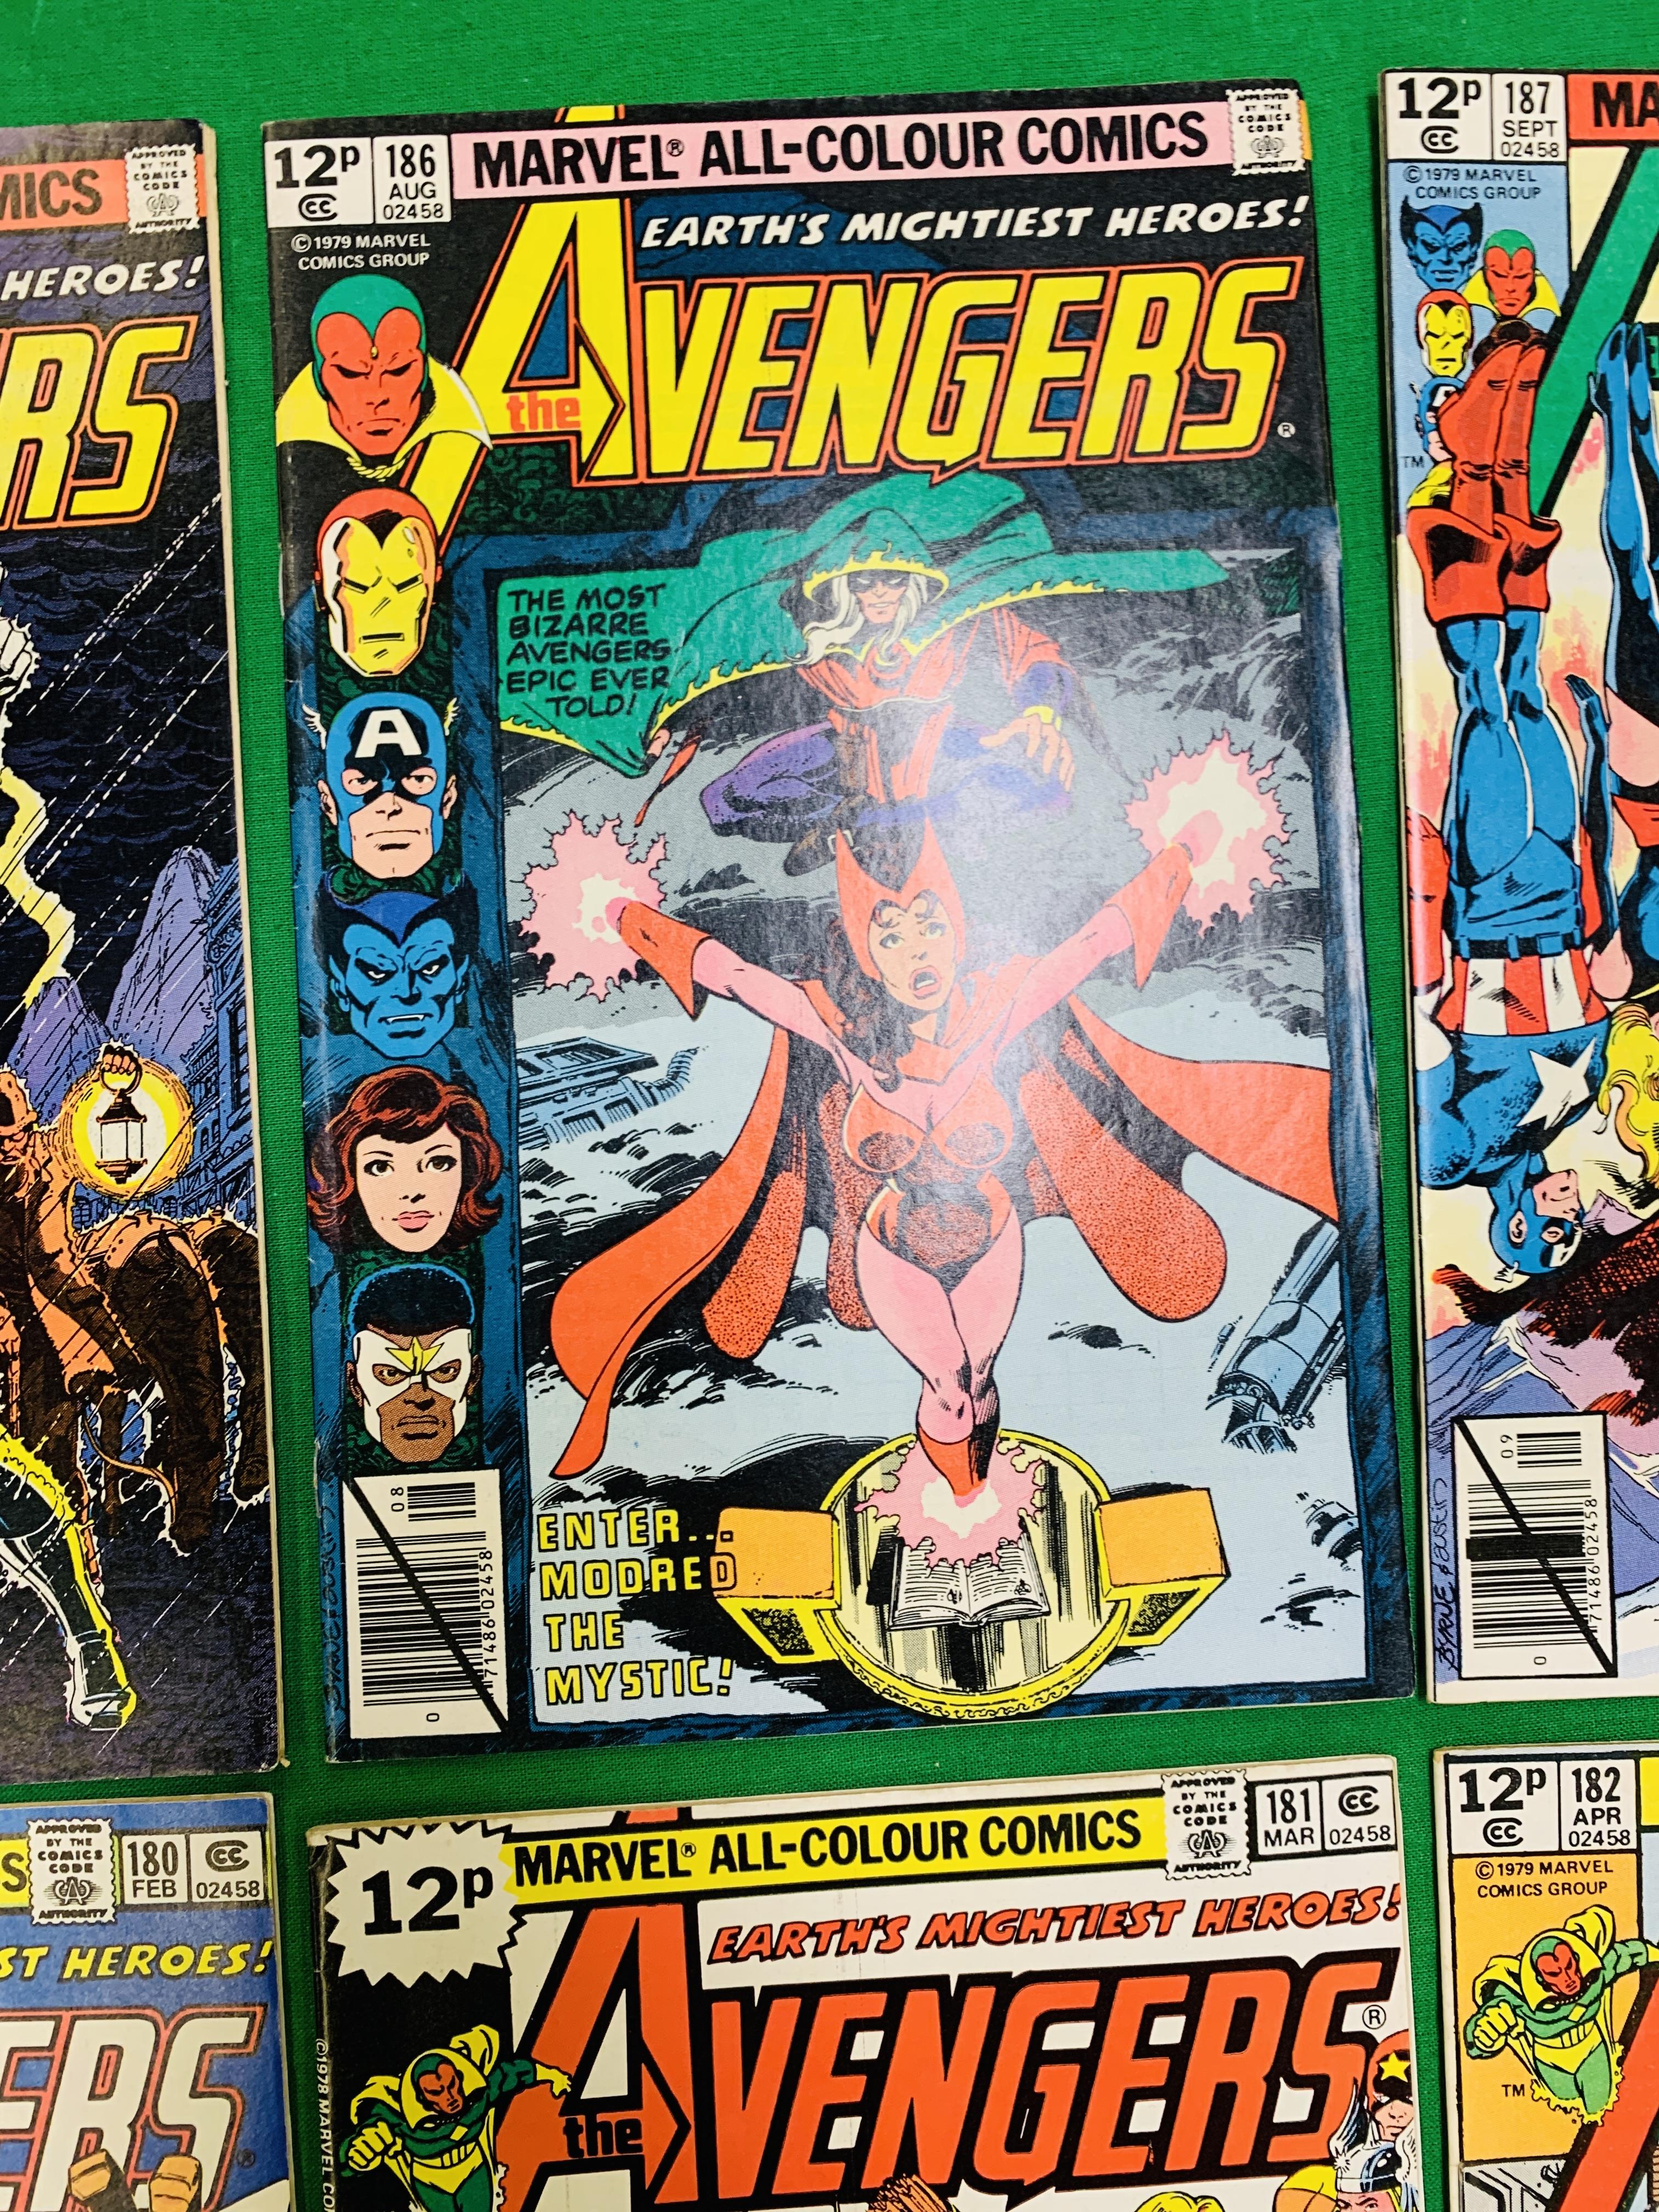 MARVEL COMICS THE AVENGERS NO. 101 - 299, MISSING ISSUES 103 AND 110. - Image 59 of 130